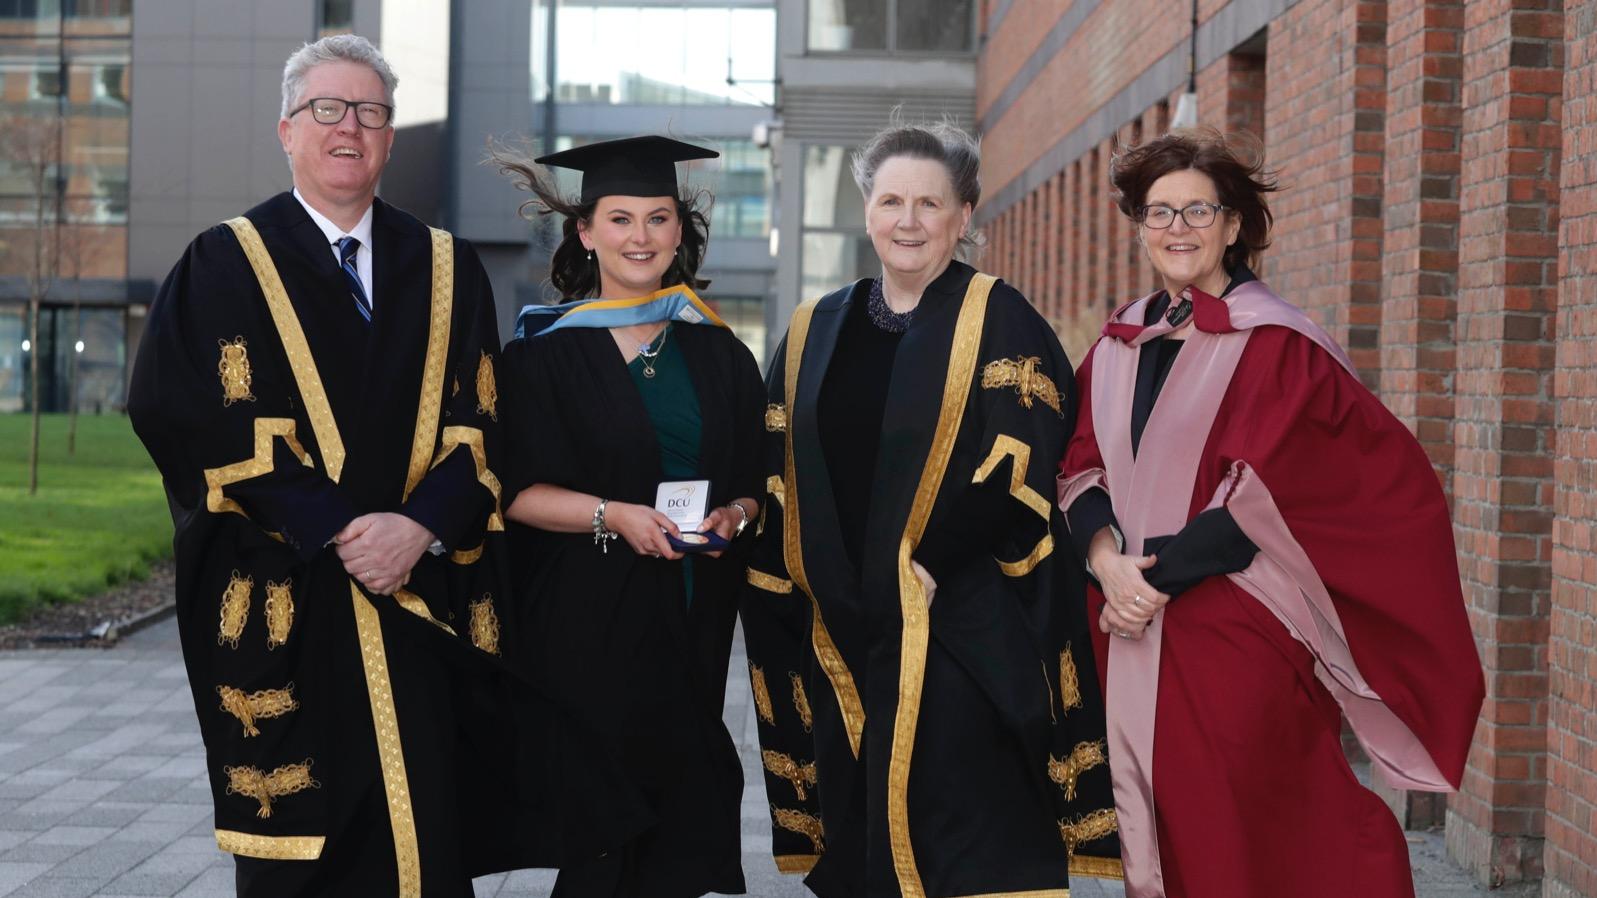 Outstanding student, inspiring teacher and talented Monaghan musician awarded DCU Chancellor’s Medal 